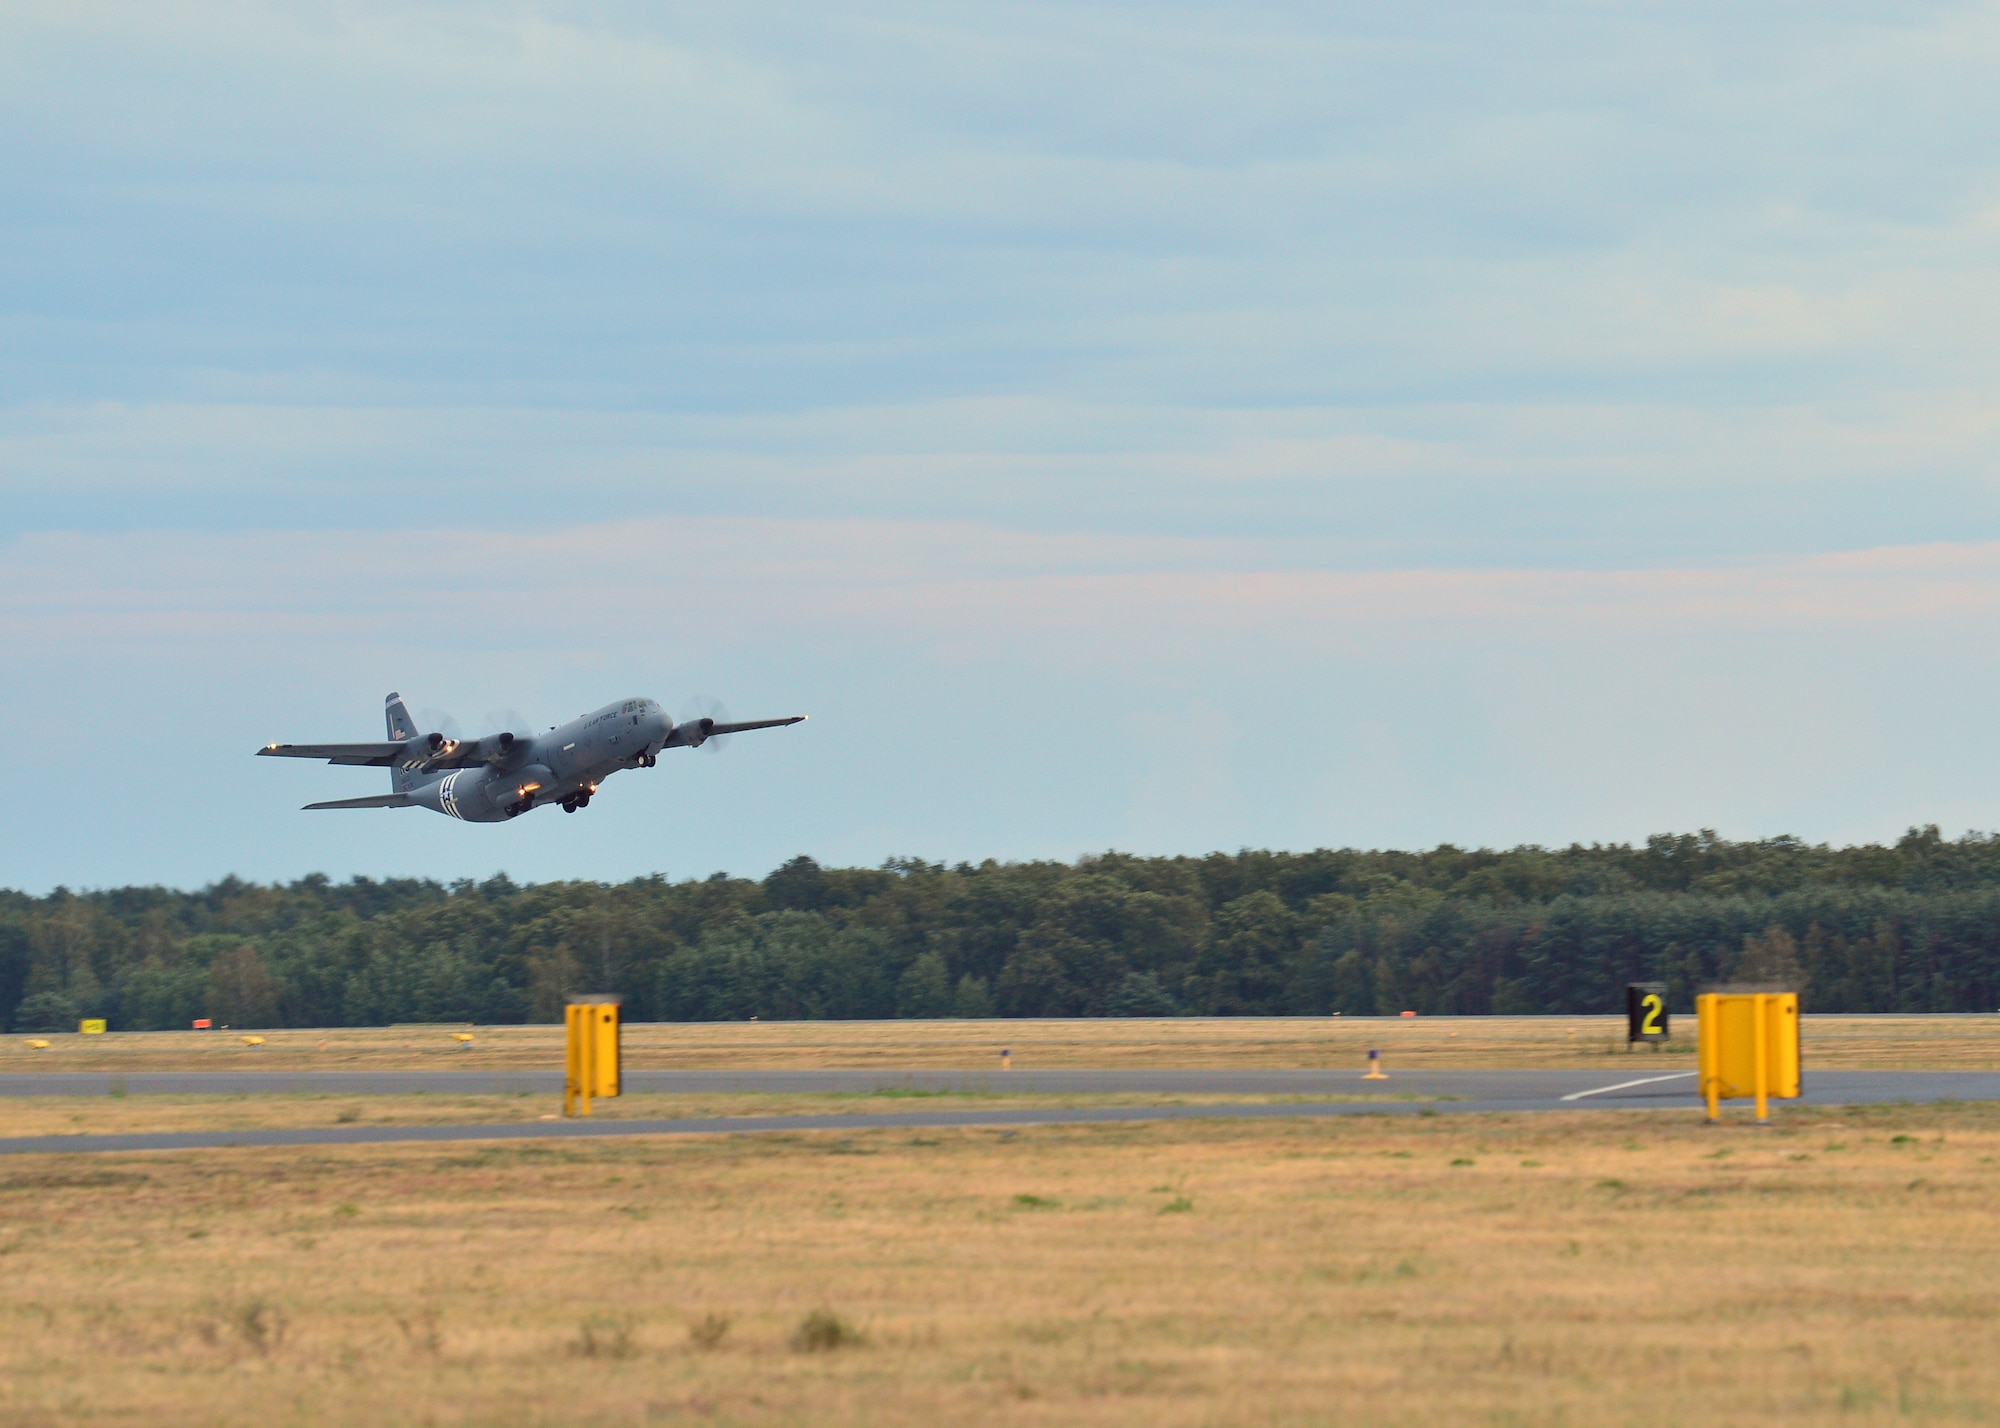 A C-130J Super Hercules assigned to the 37th Airlift Squadron takes off from Powidz Air Base, Poland, July 10, 2019. Aviation Rotation is a continuing bilateral training exercise between the U.S. and Polish air forces to increase partnership capacities. (U.S. Air Force photo by Staff Sgt. Jimmie D. Pike)